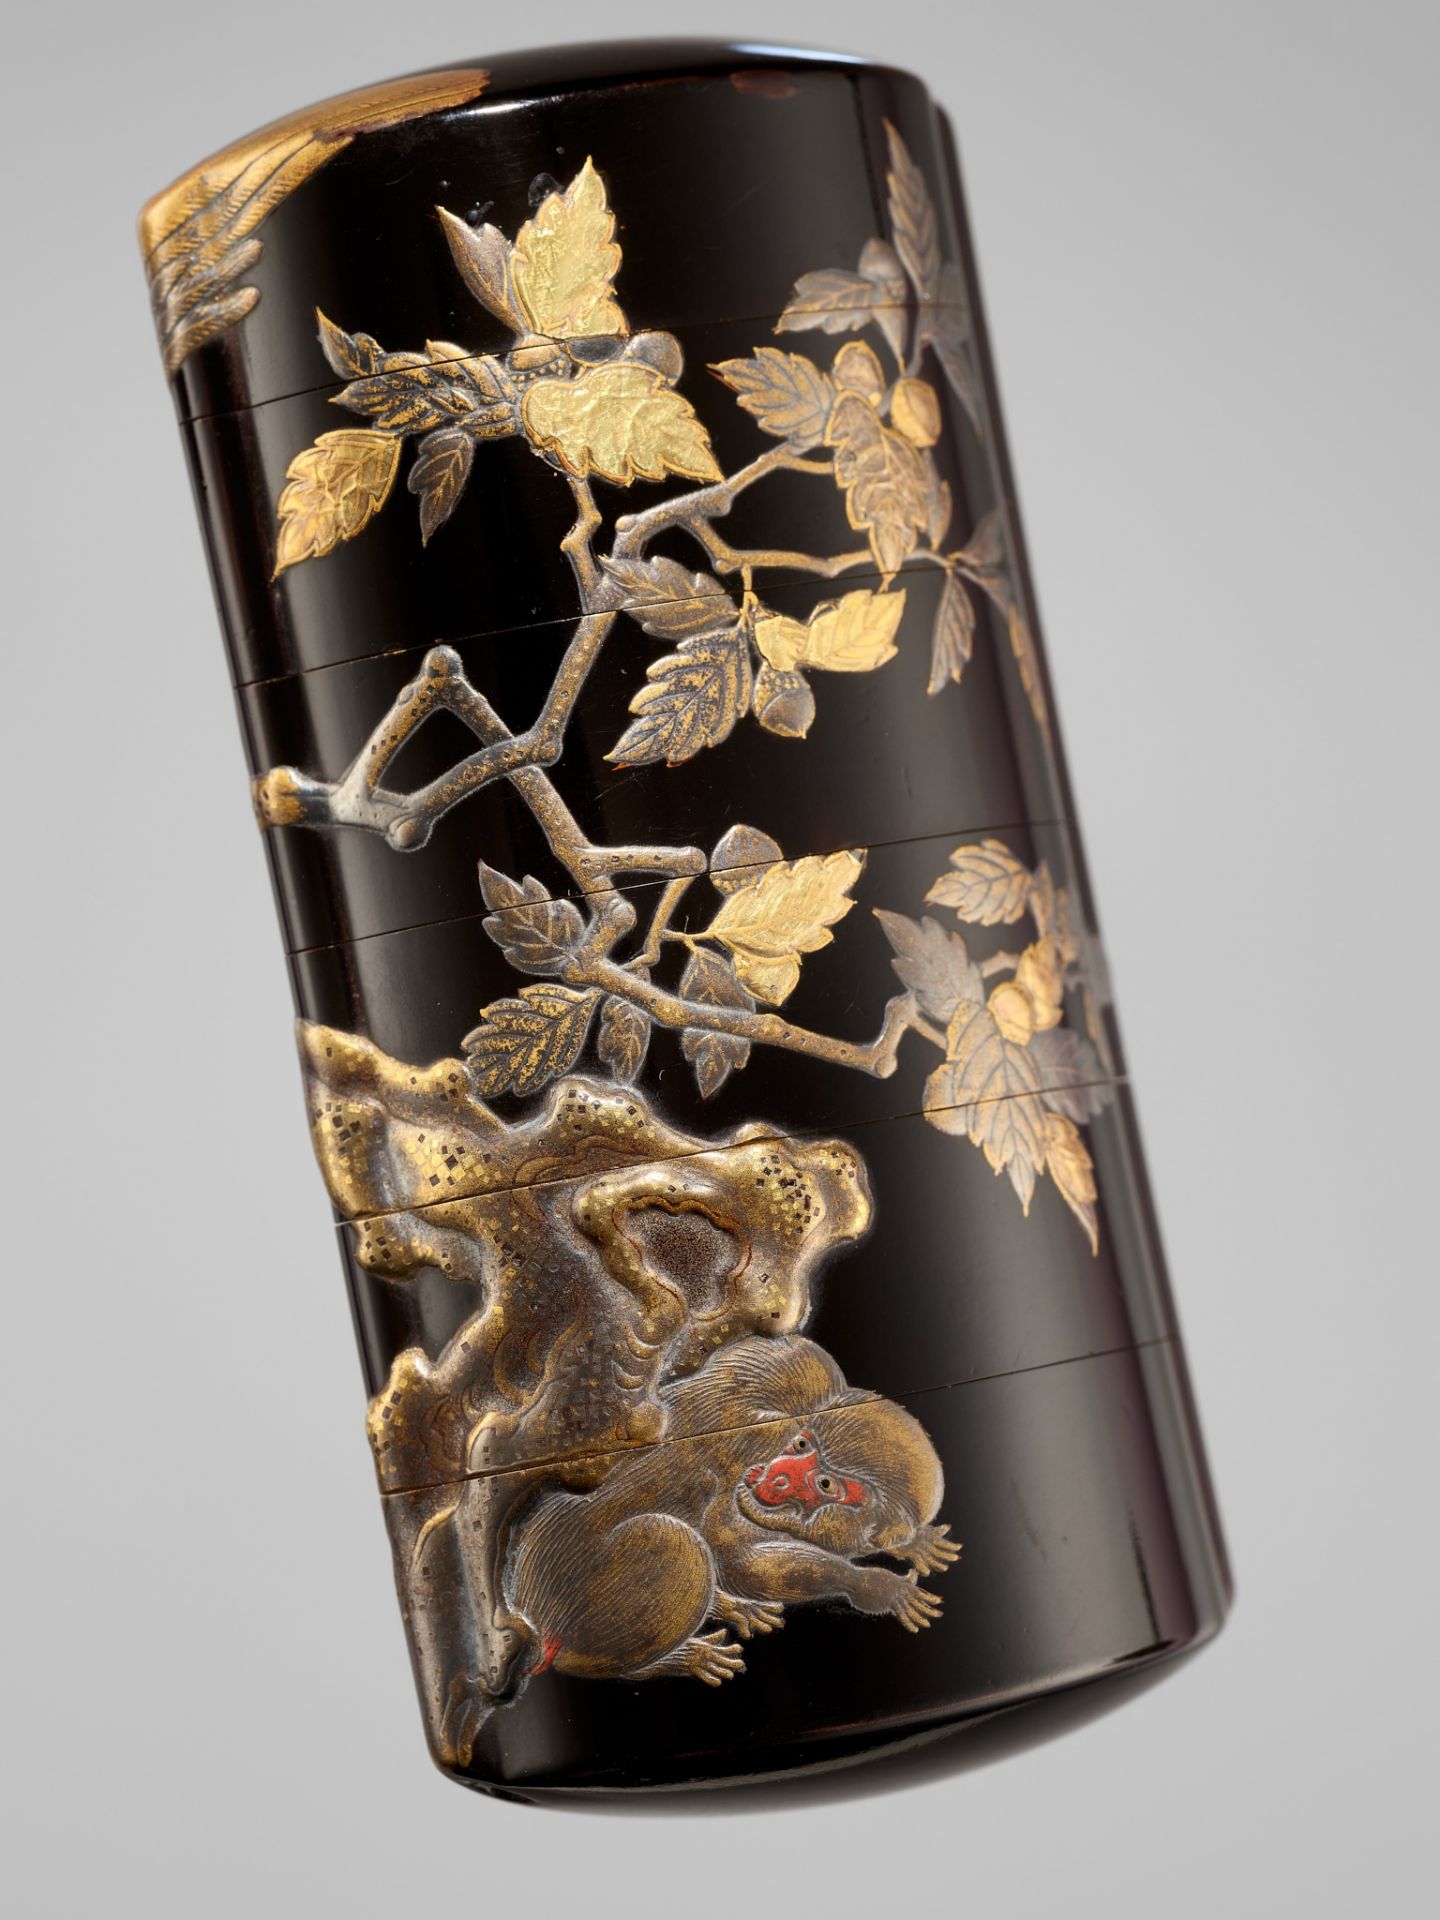 A FINE FIVE-CASE LACQUER INRO DEPICTING AN EAGLE AND MONKEY - Image 4 of 6